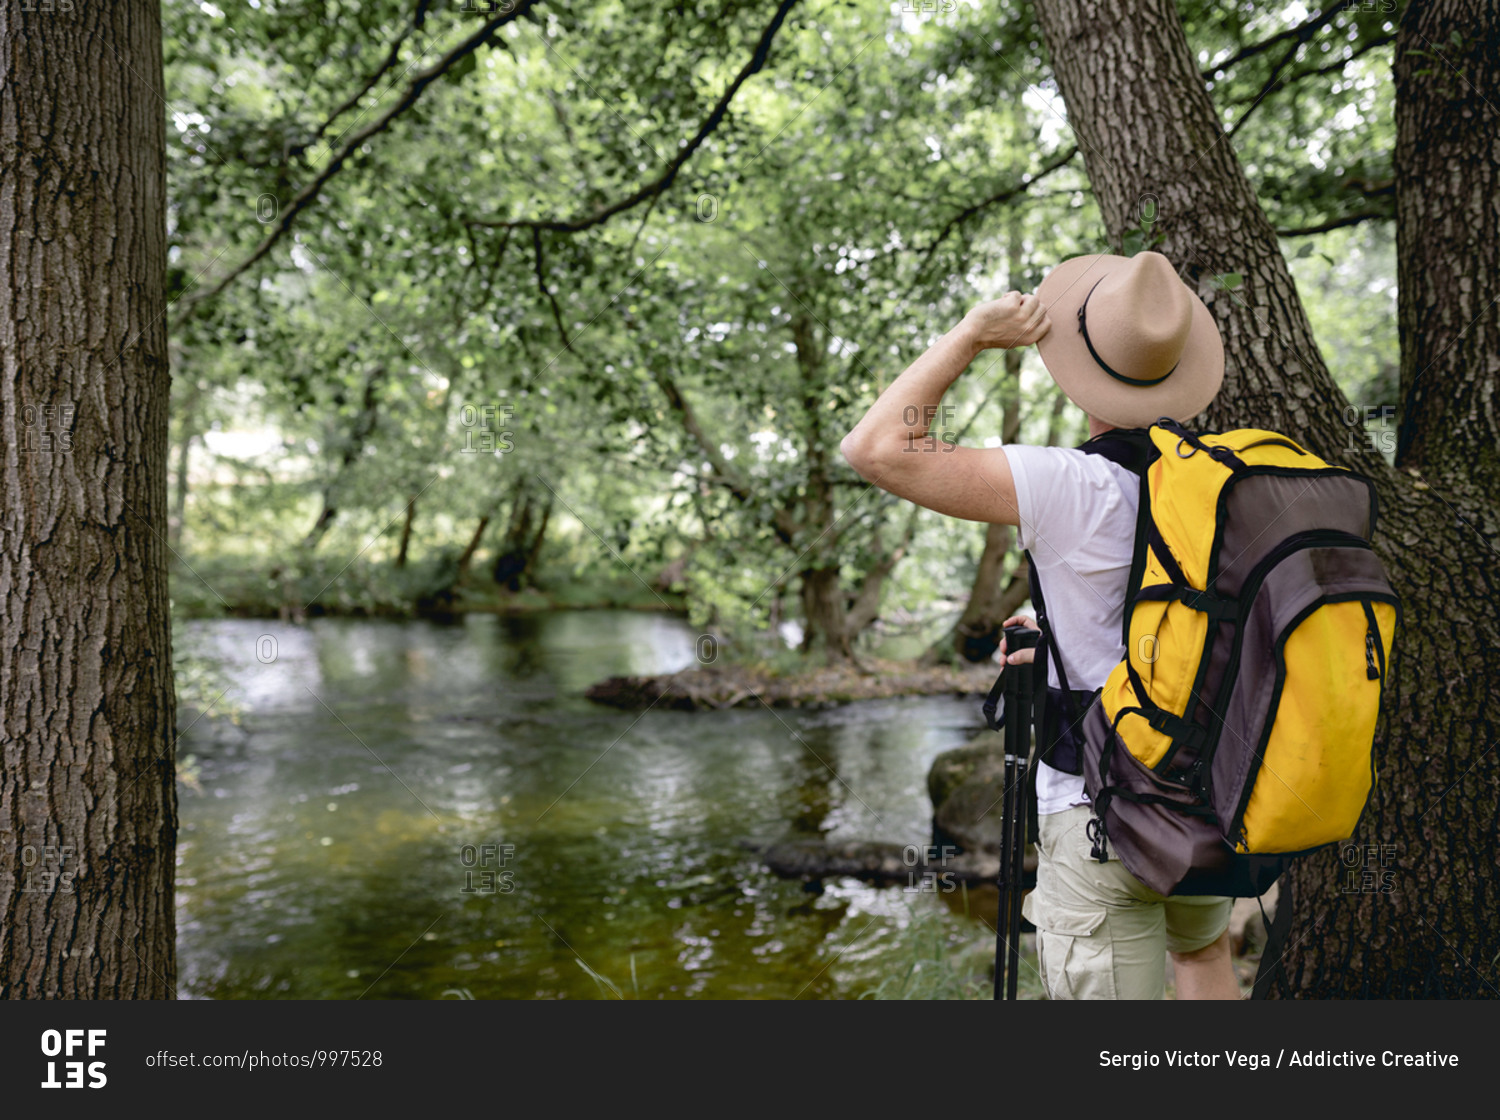 young man doing a hiking trail with his yellow backpack and hat on his head by a lake with many trees and natural areas looking at the landscape